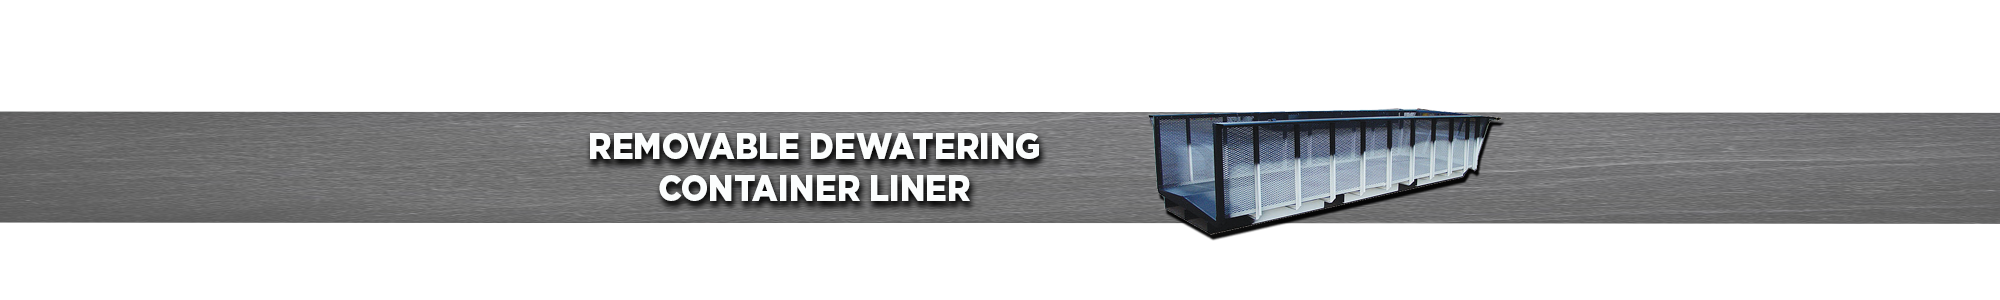 Removable Dewatering Container Liner